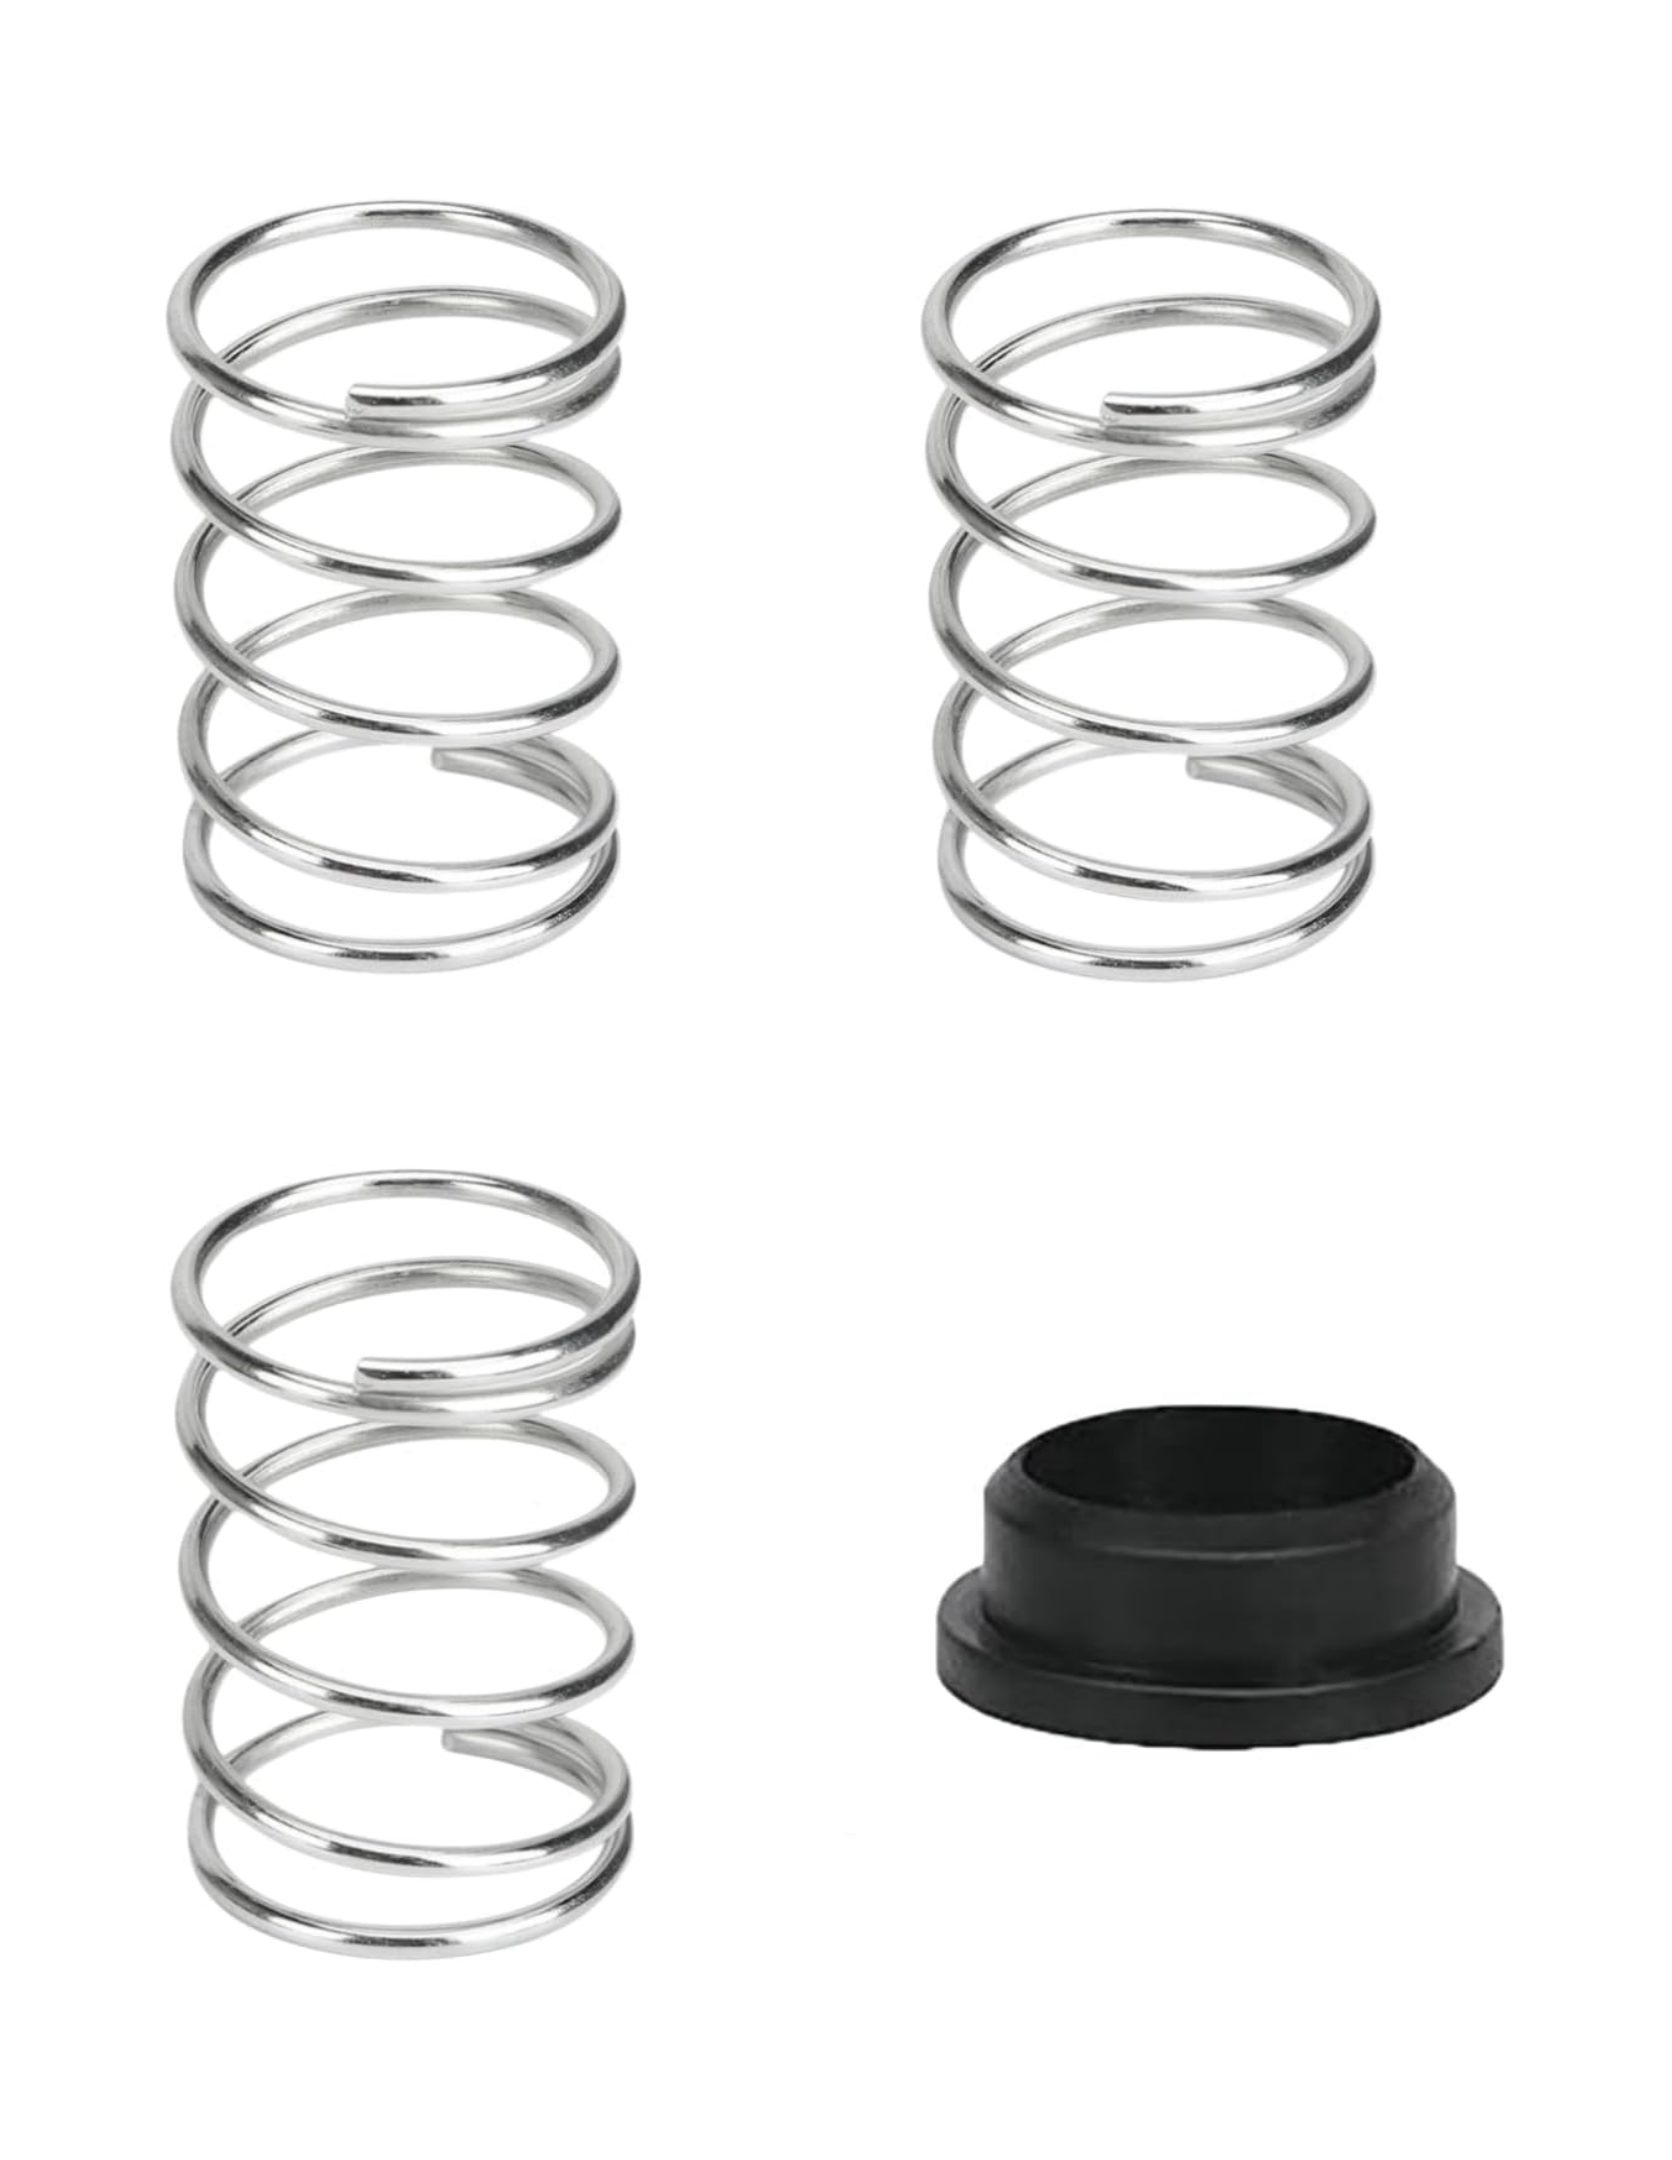 THTEN CMZST260H Trimmer Head Replacement Spring Base Compatible with Craftsman CMCST920 CMCST960 CMCST960E1 Type 1 CMCST920M1 Qucikwind Weedwacker Series String Trimmer,4 Pack